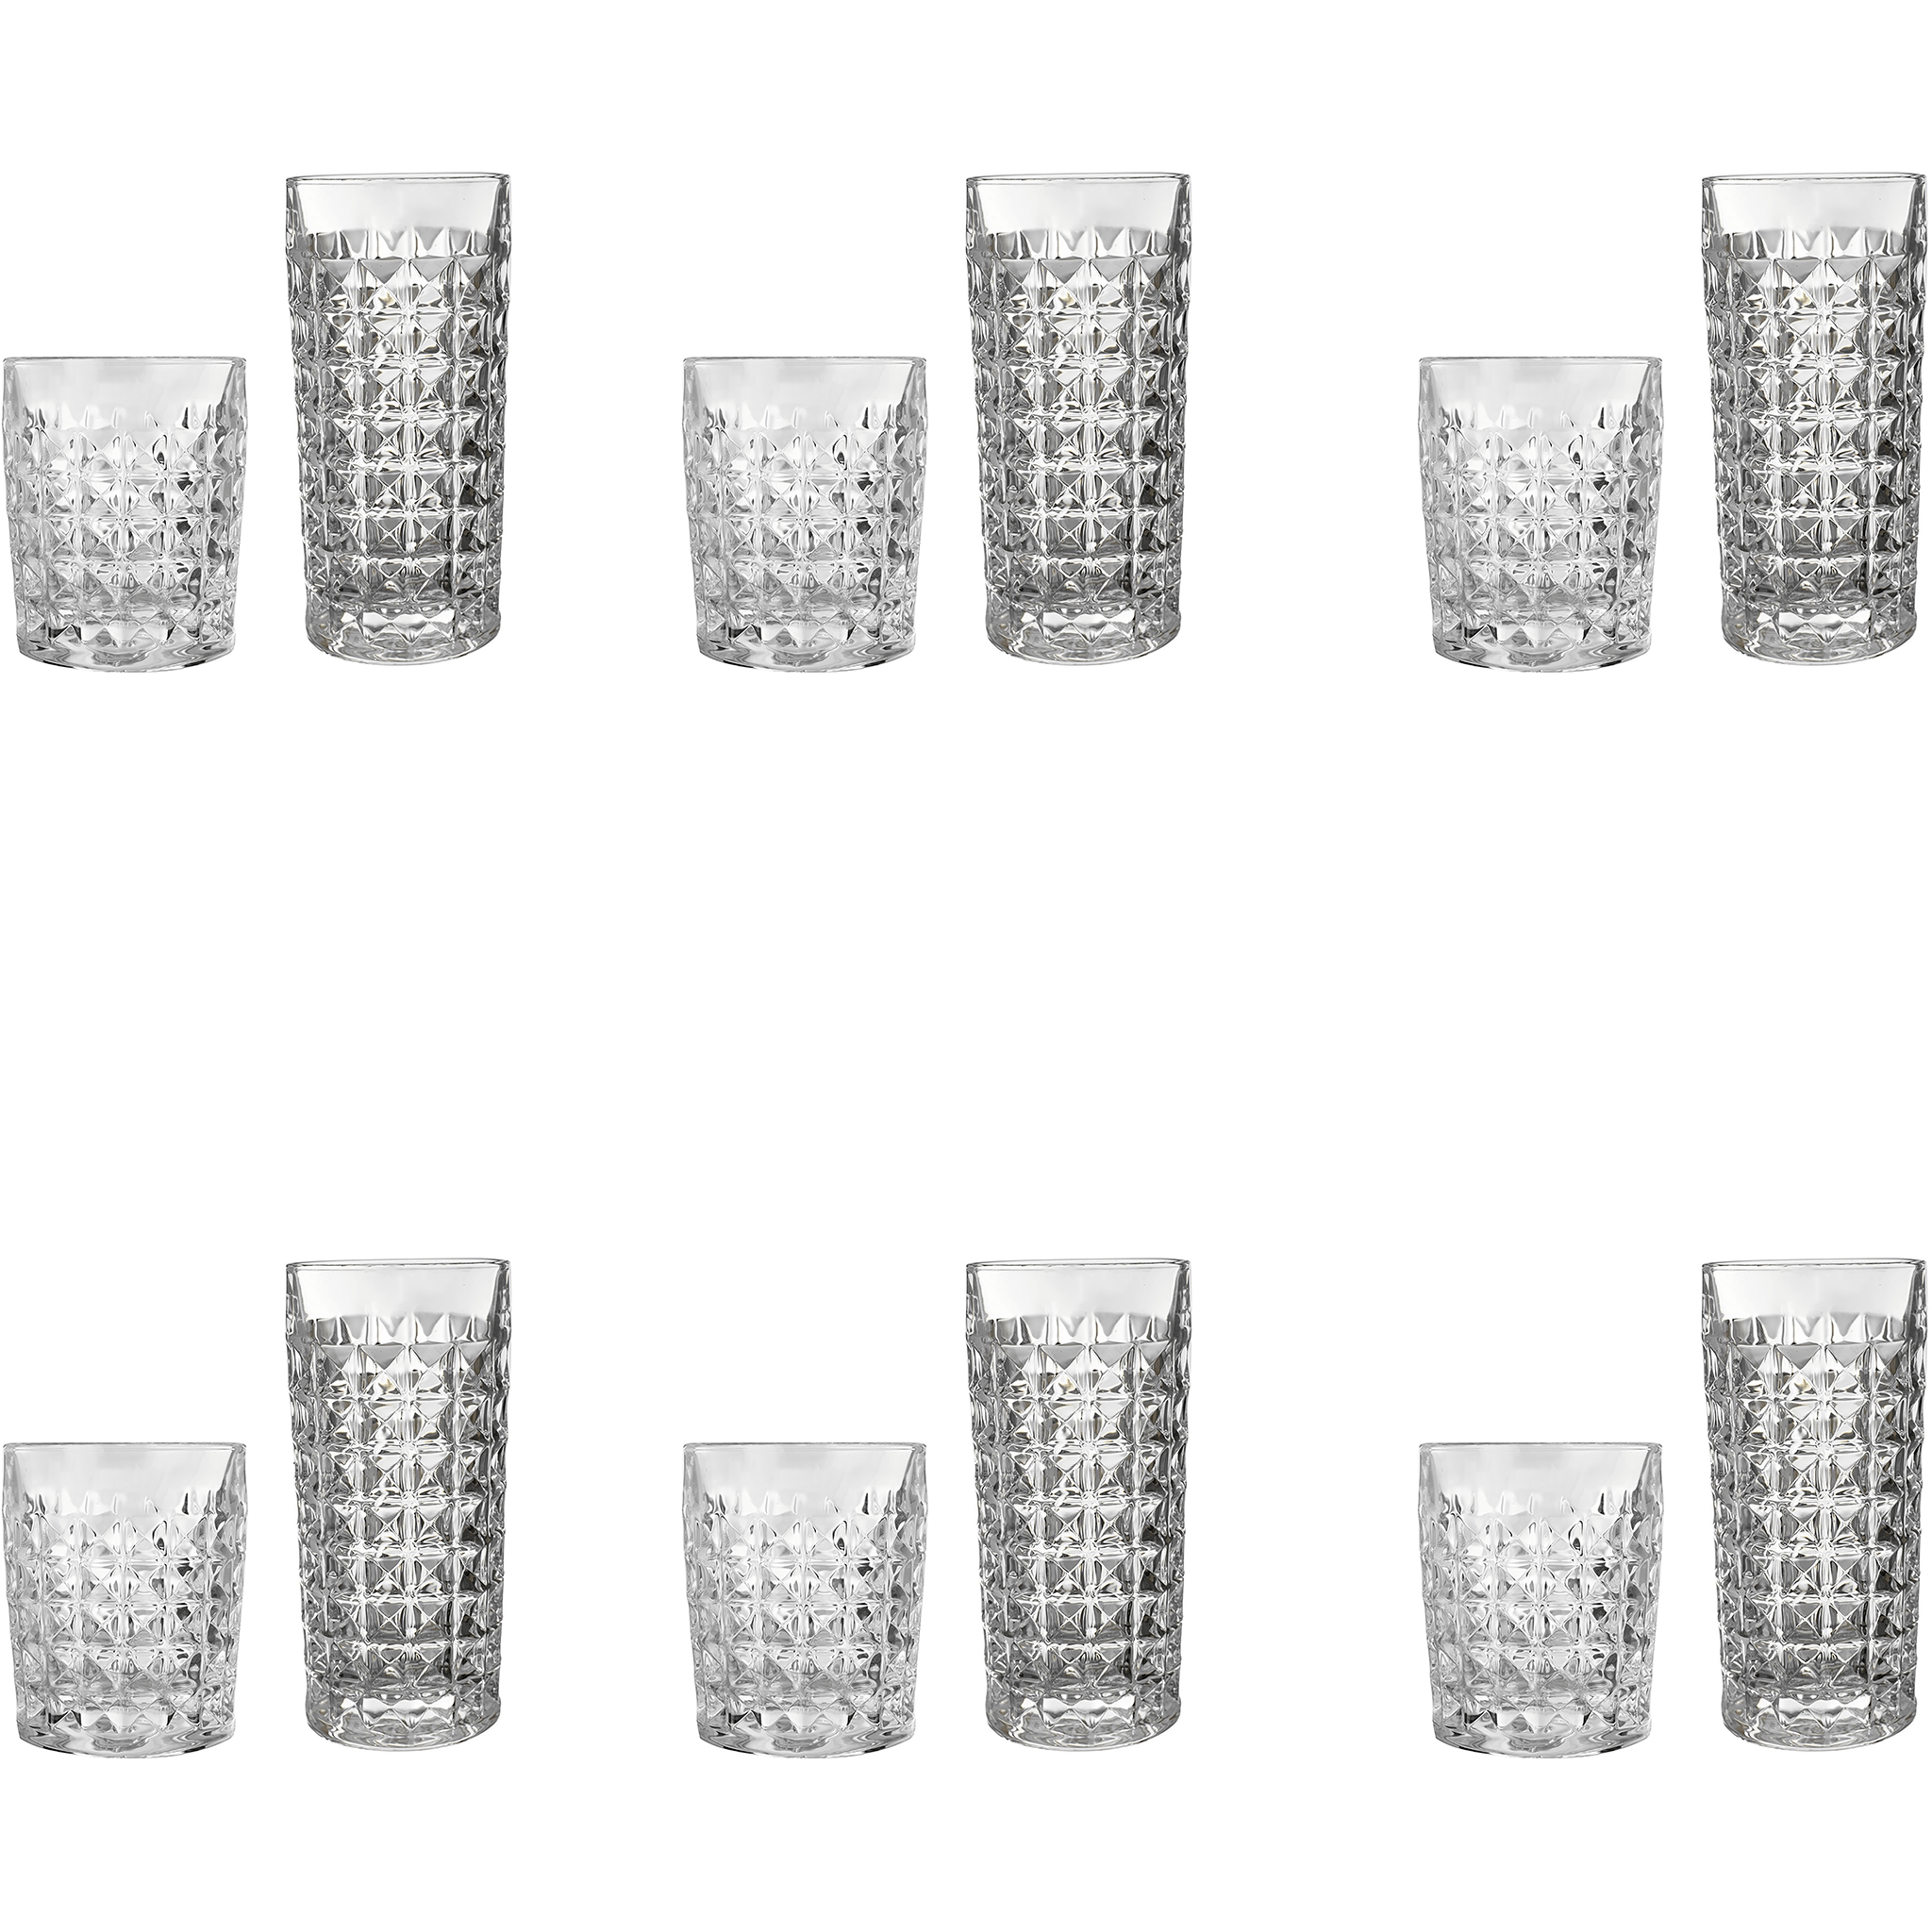 Highball & Tumbler Glass Set 12 Pieces - Glass - Made in China - 260&230ml